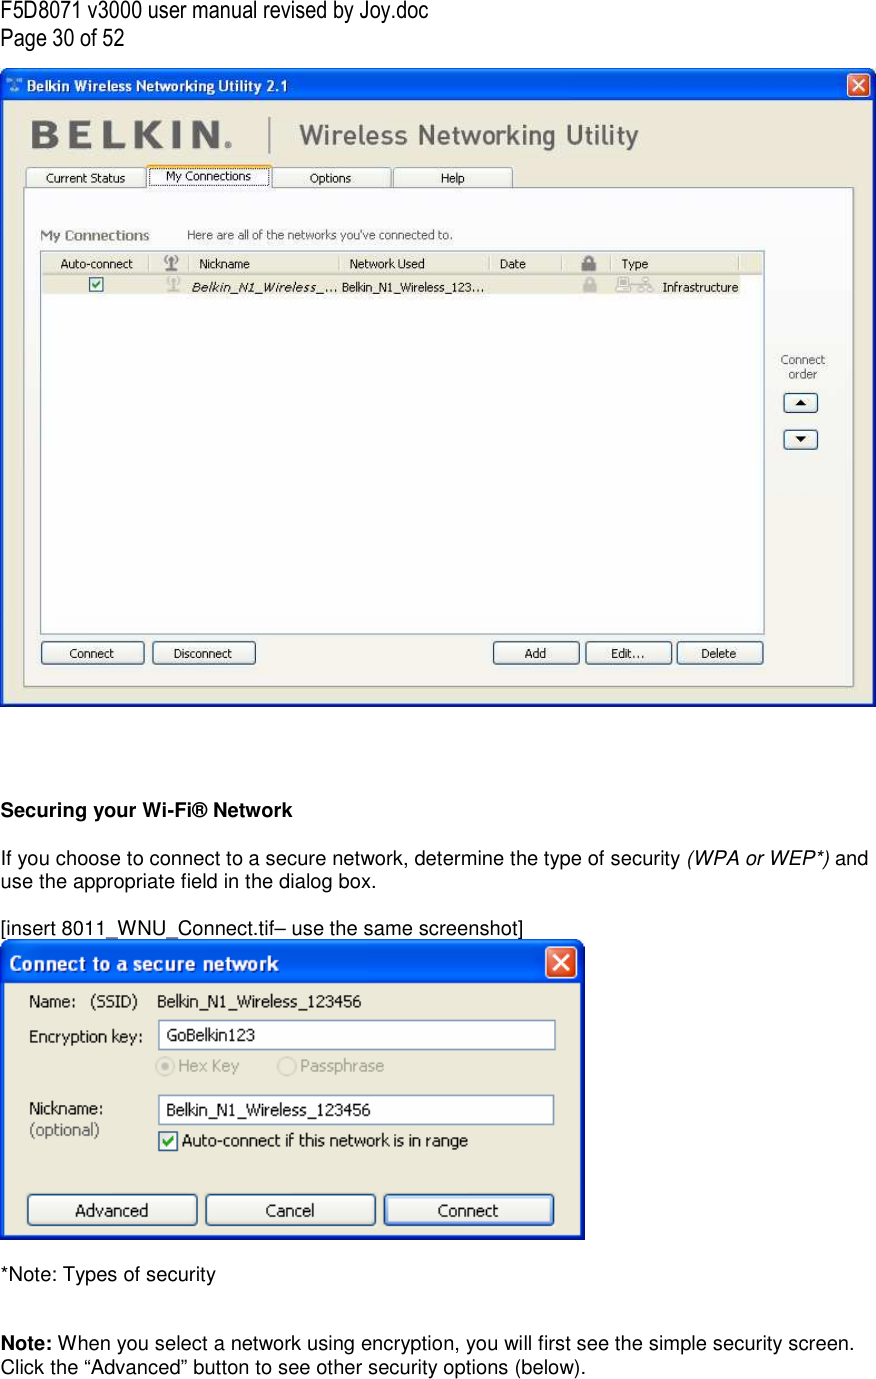 F5D8071 v3000 user manual revised by Joy.doc Page 30 of 52      Securing your Wi-Fi® Network  If you choose to connect to a secure network, determine the type of security (WPA or WEP*) and use the appropriate field in the dialog box.  [insert 8011_WNU_Connect.tif– use the same screenshot]   *Note: Types of security   Note: When you select a network using encryption, you will first see the simple security screen. Click the “Advanced” button to see other security options (below).  